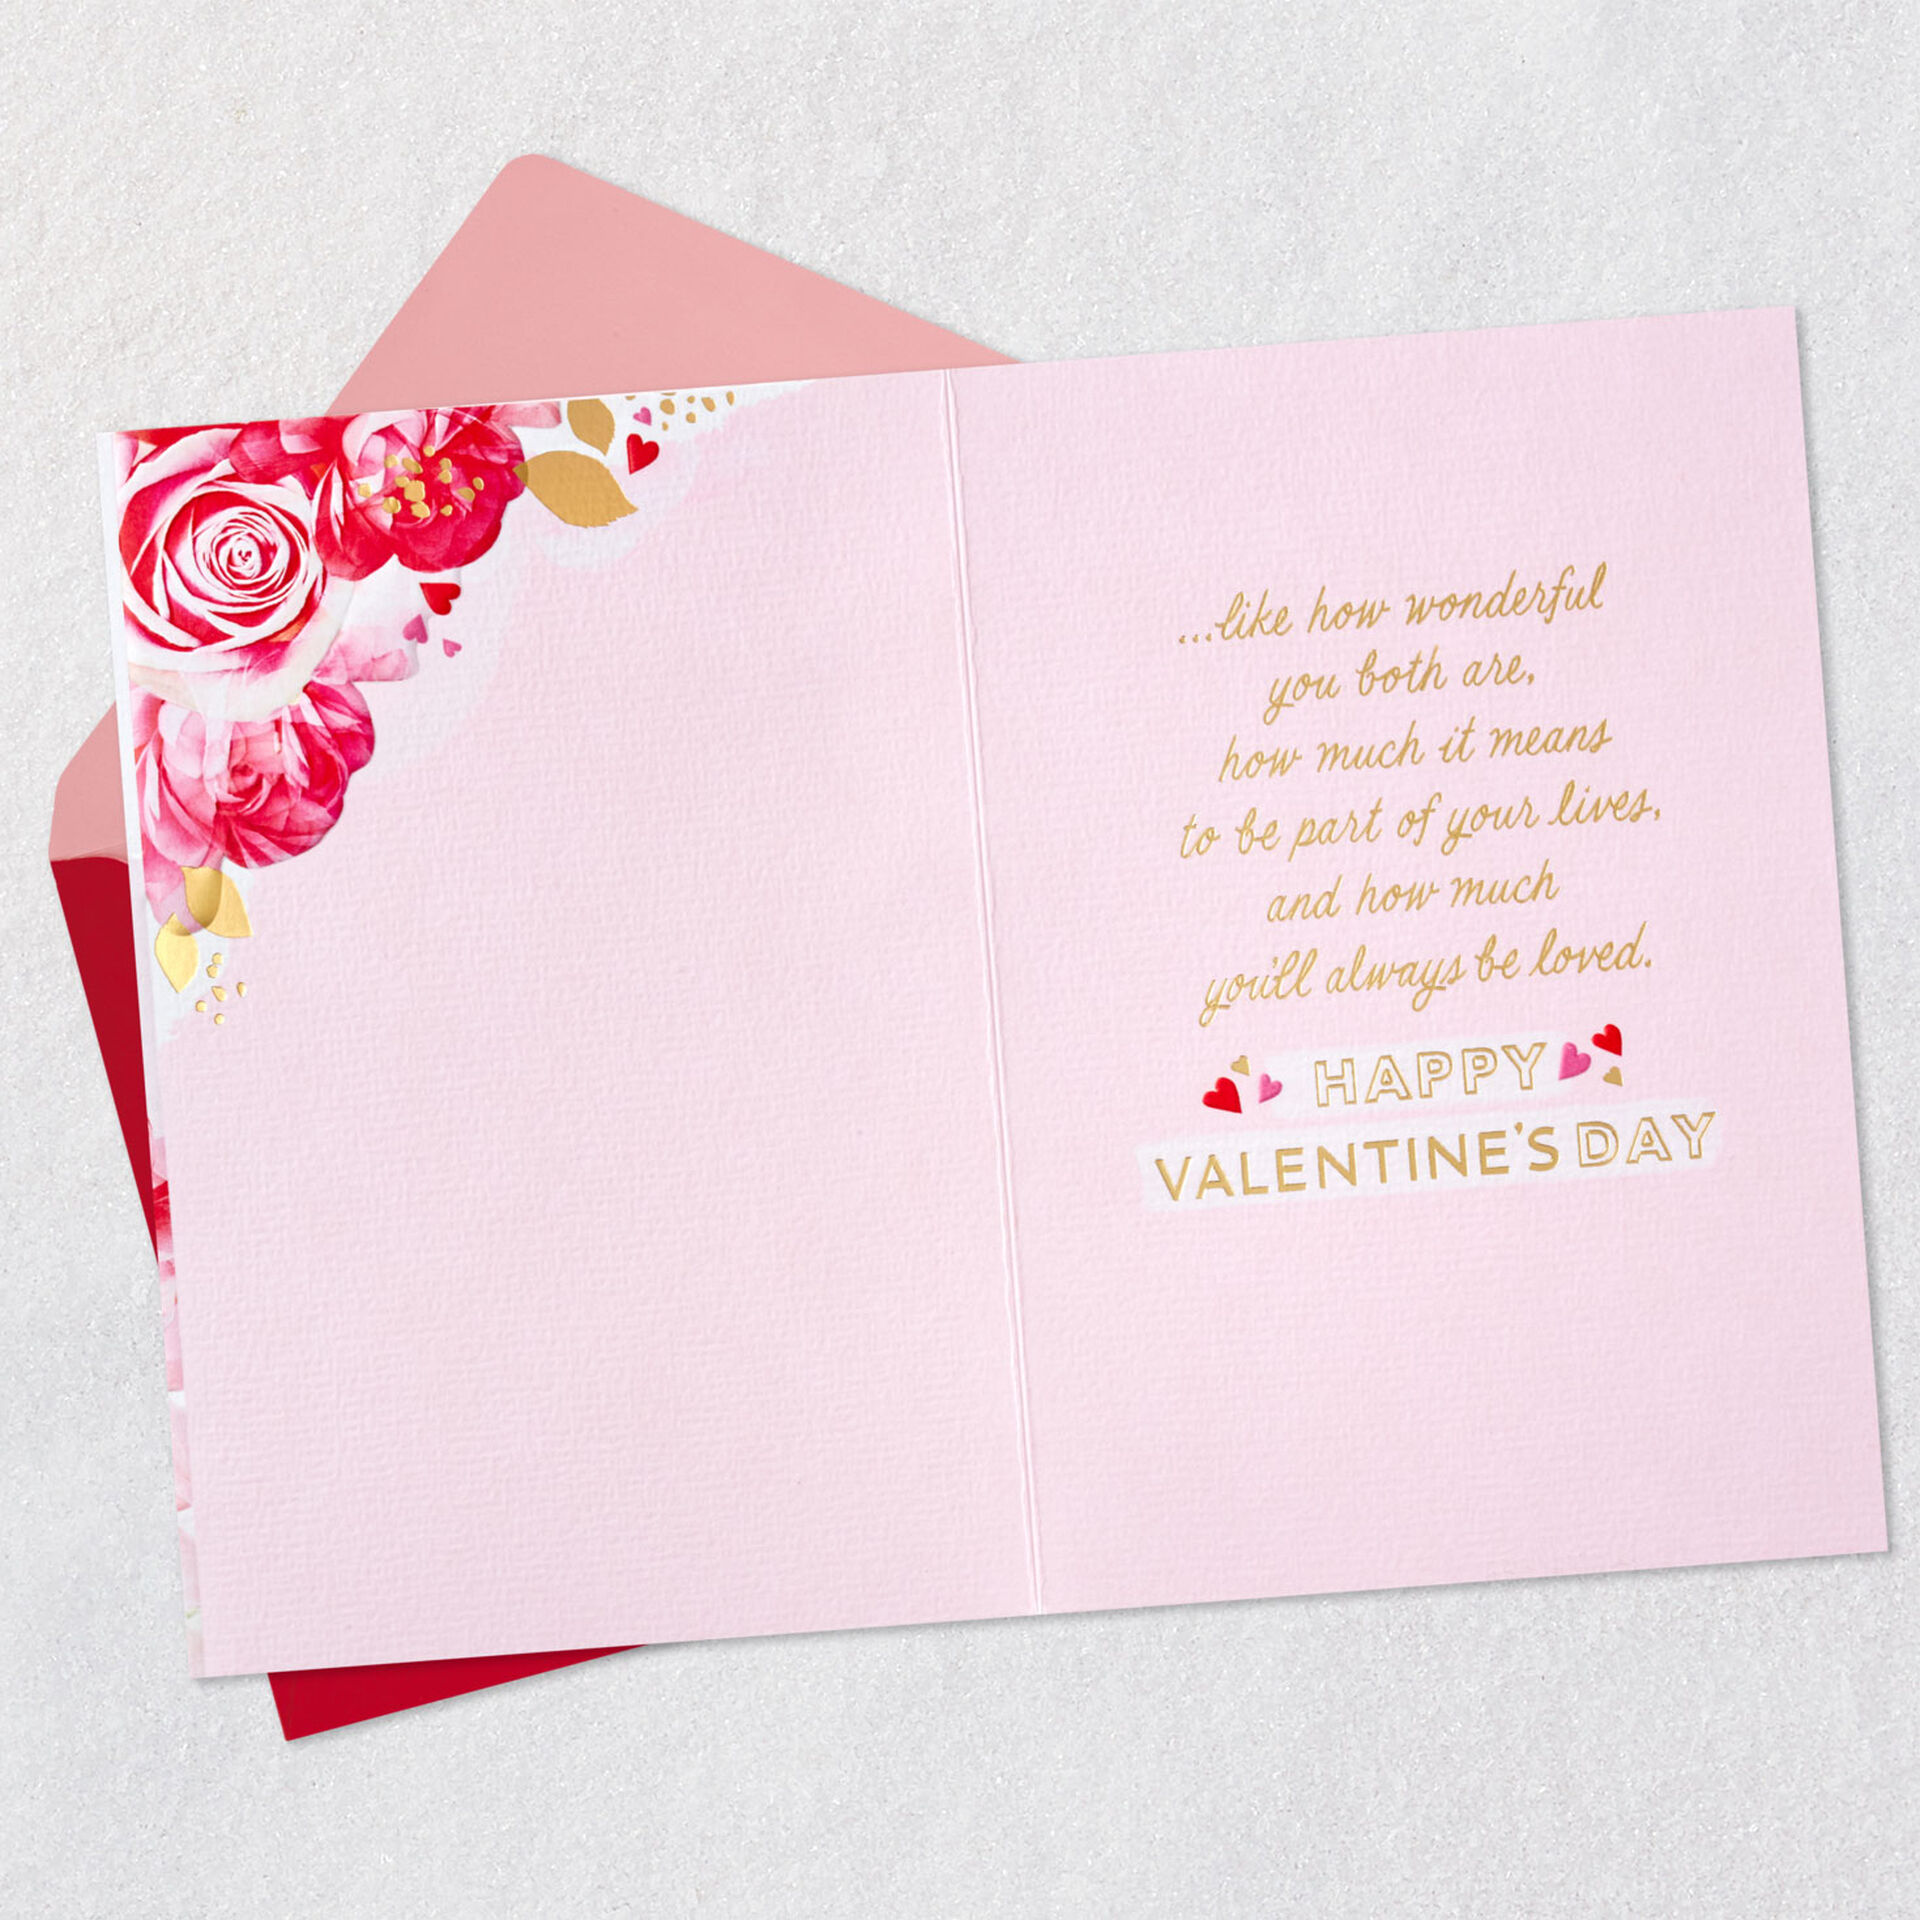 Flowers-Daughter-and-SoninLaw-Valentines-Day-Card_499VEE4419_03